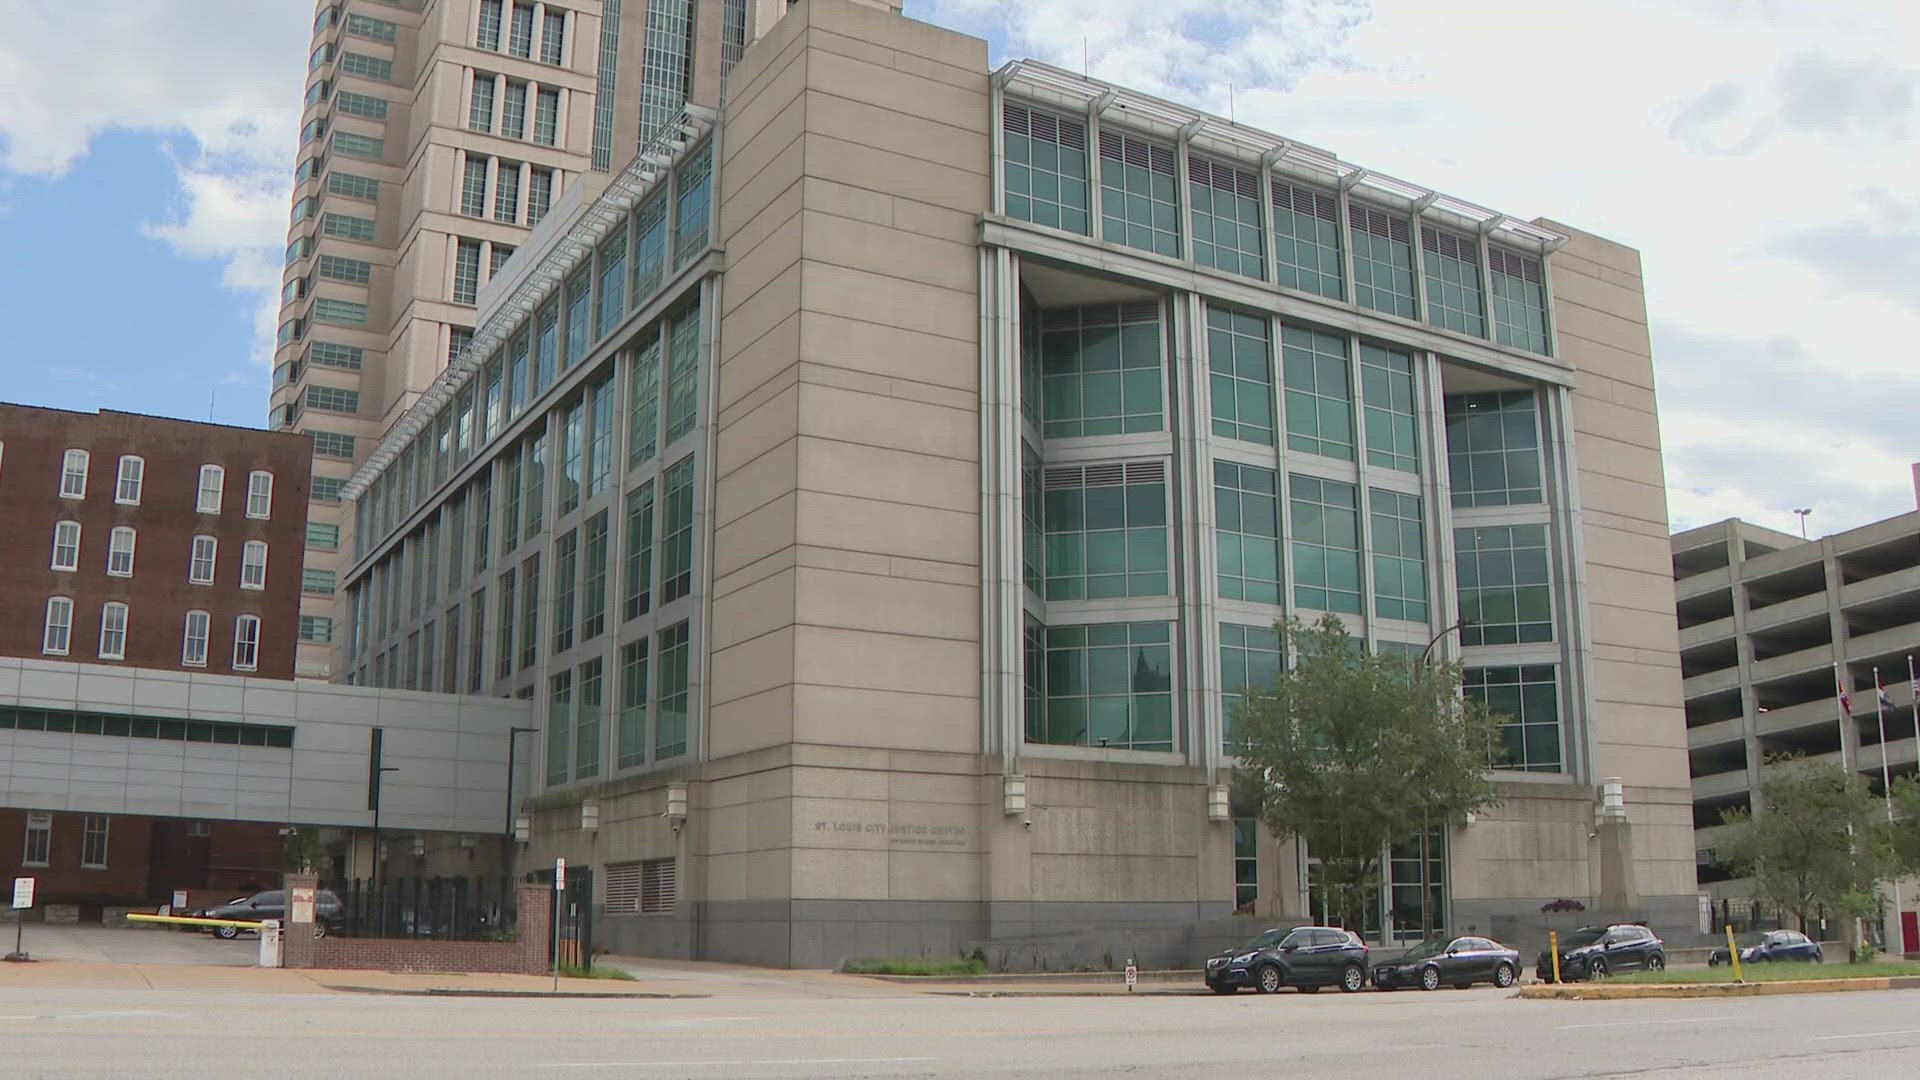 Two inmates assaulted a correctional officer at the City Justice Center Sunday. It's the second attack on a guard there in less than two months.